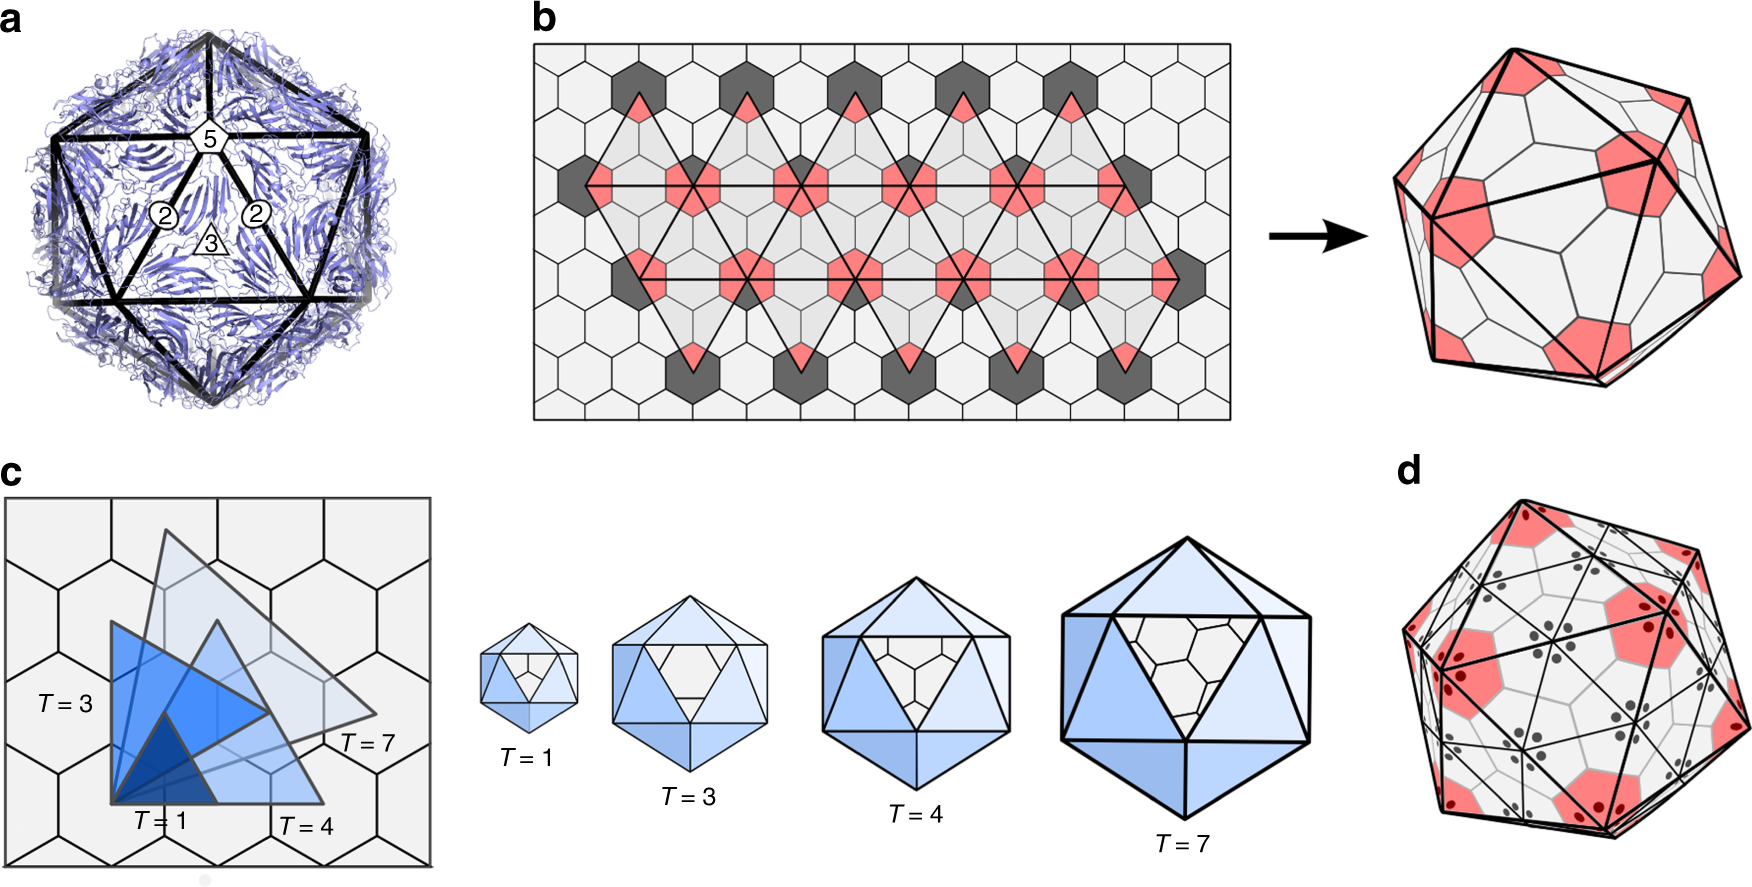 Structural Puzzles In Virology Solved With An Overarching Icosahedral Design Principle Nature Communications